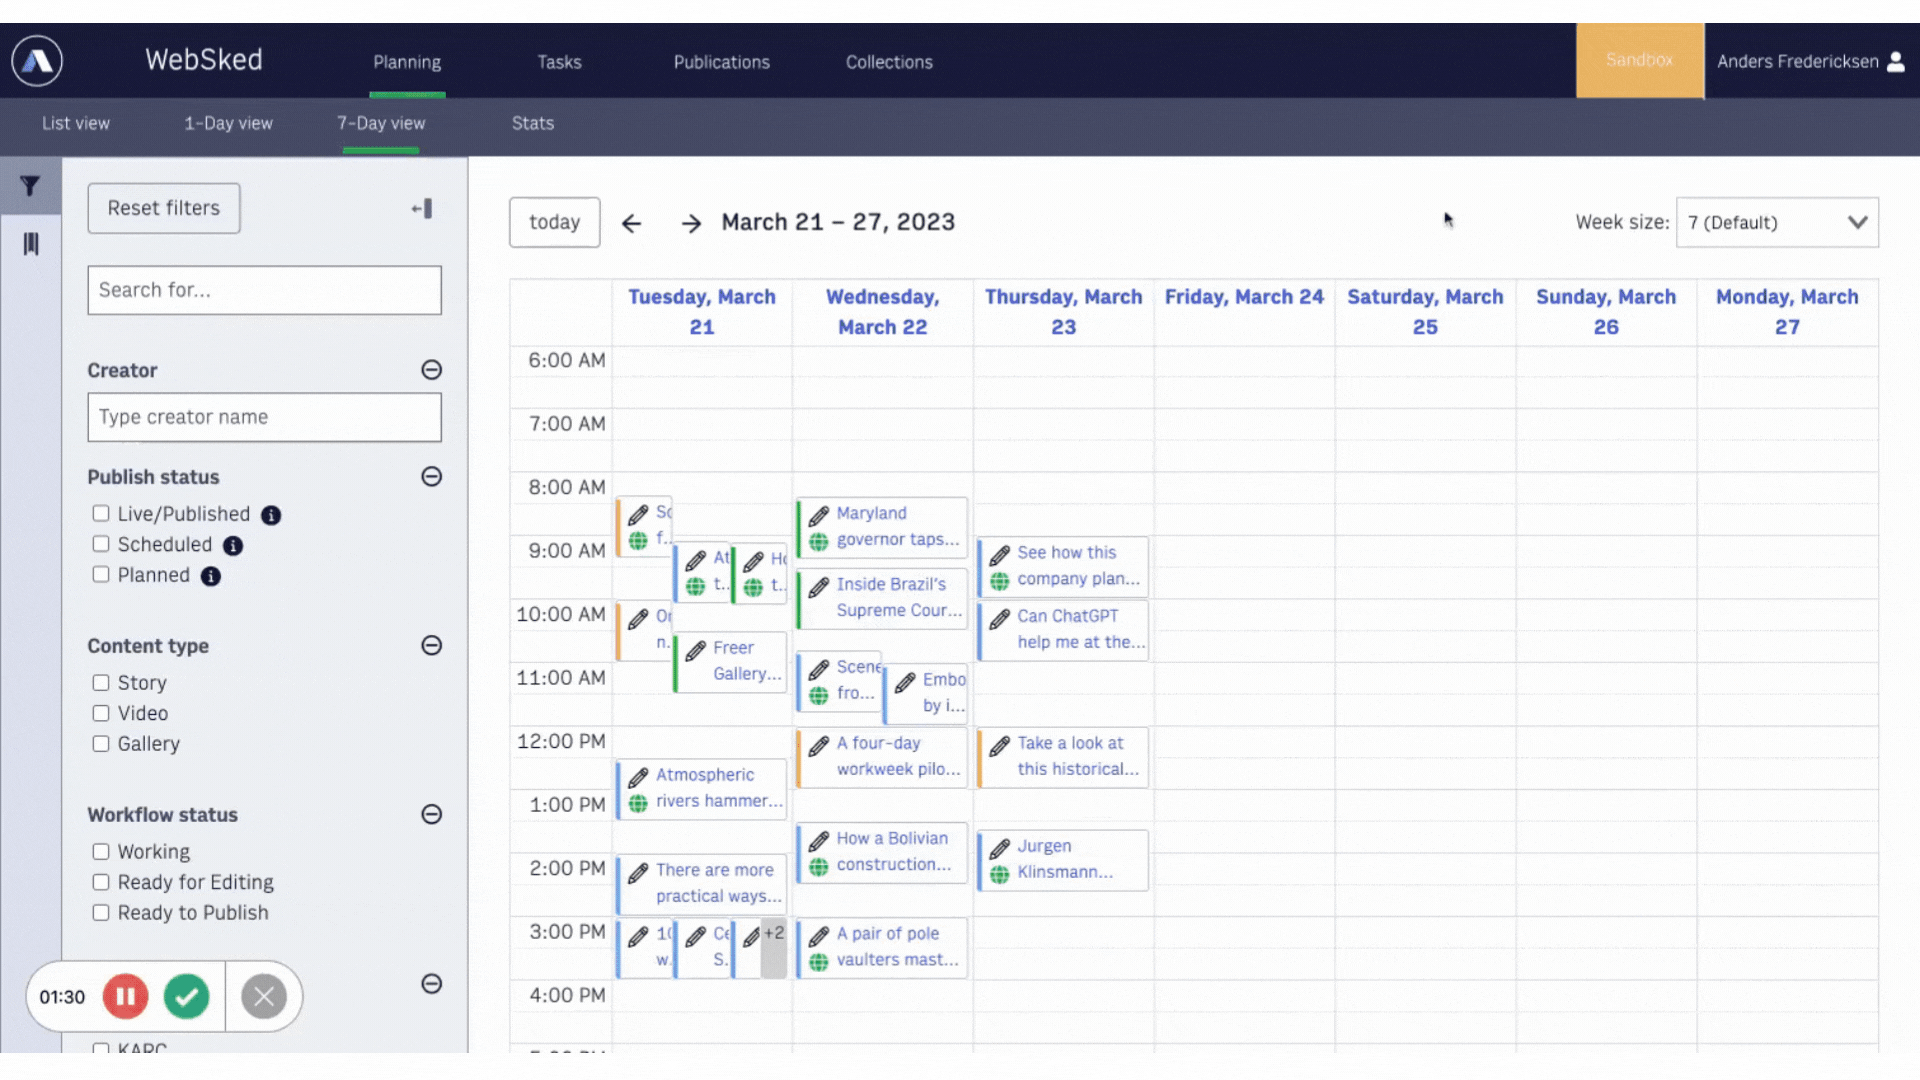 Get one centralized, chronological view of your content with Arc XP WebSked